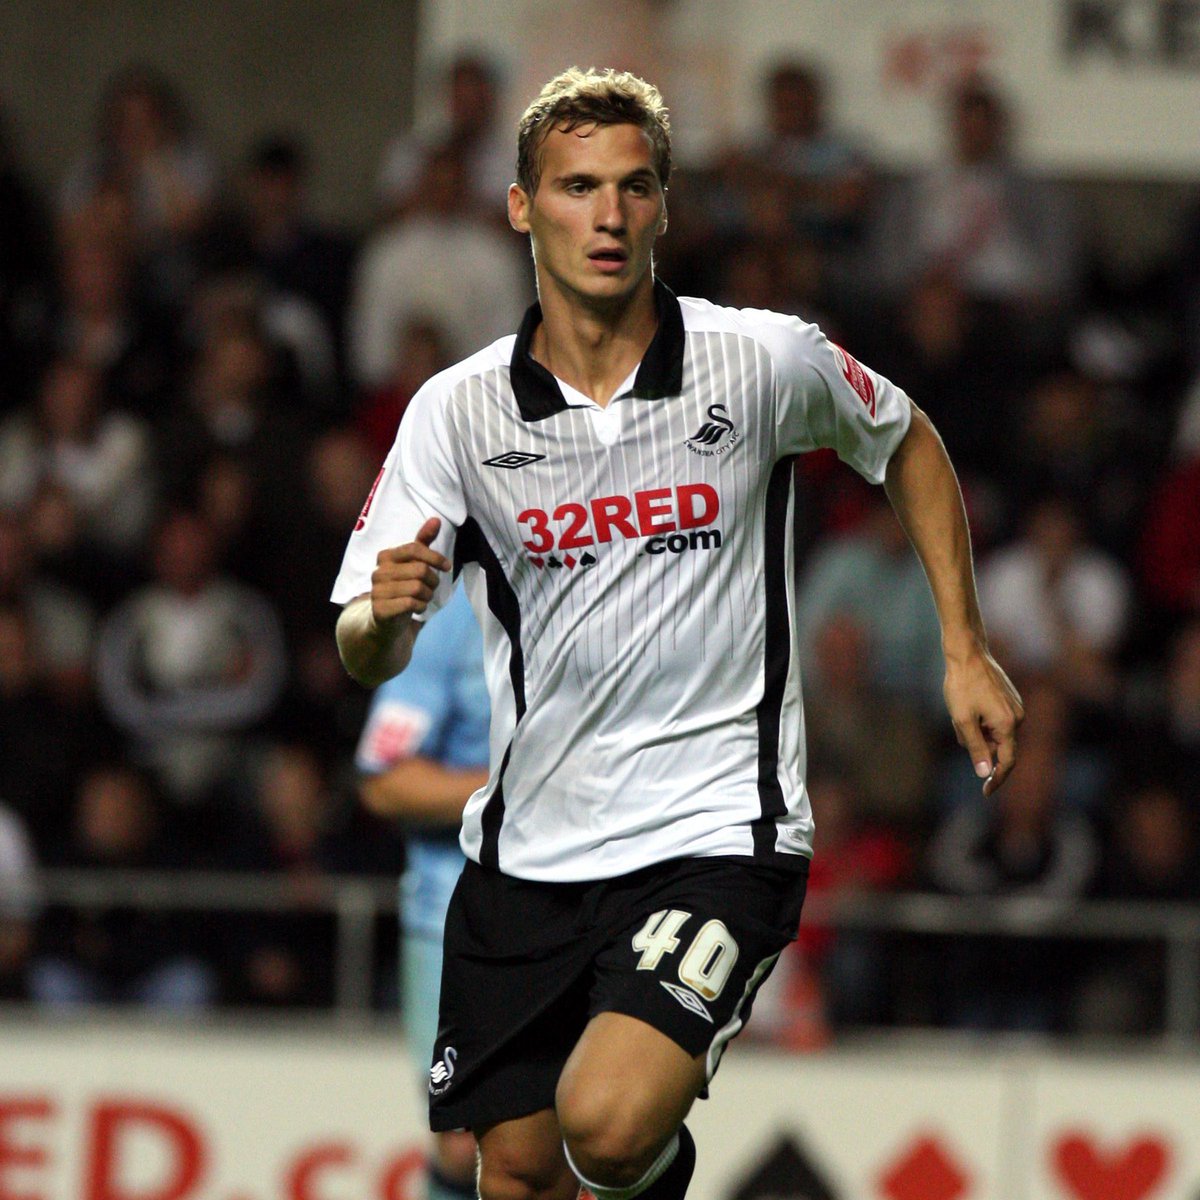 Besian Idrizaj was cruelly taken from us 14 years ago today 🌹 Forever in our hearts. Once a Jack, always a Jack 🖤🤍